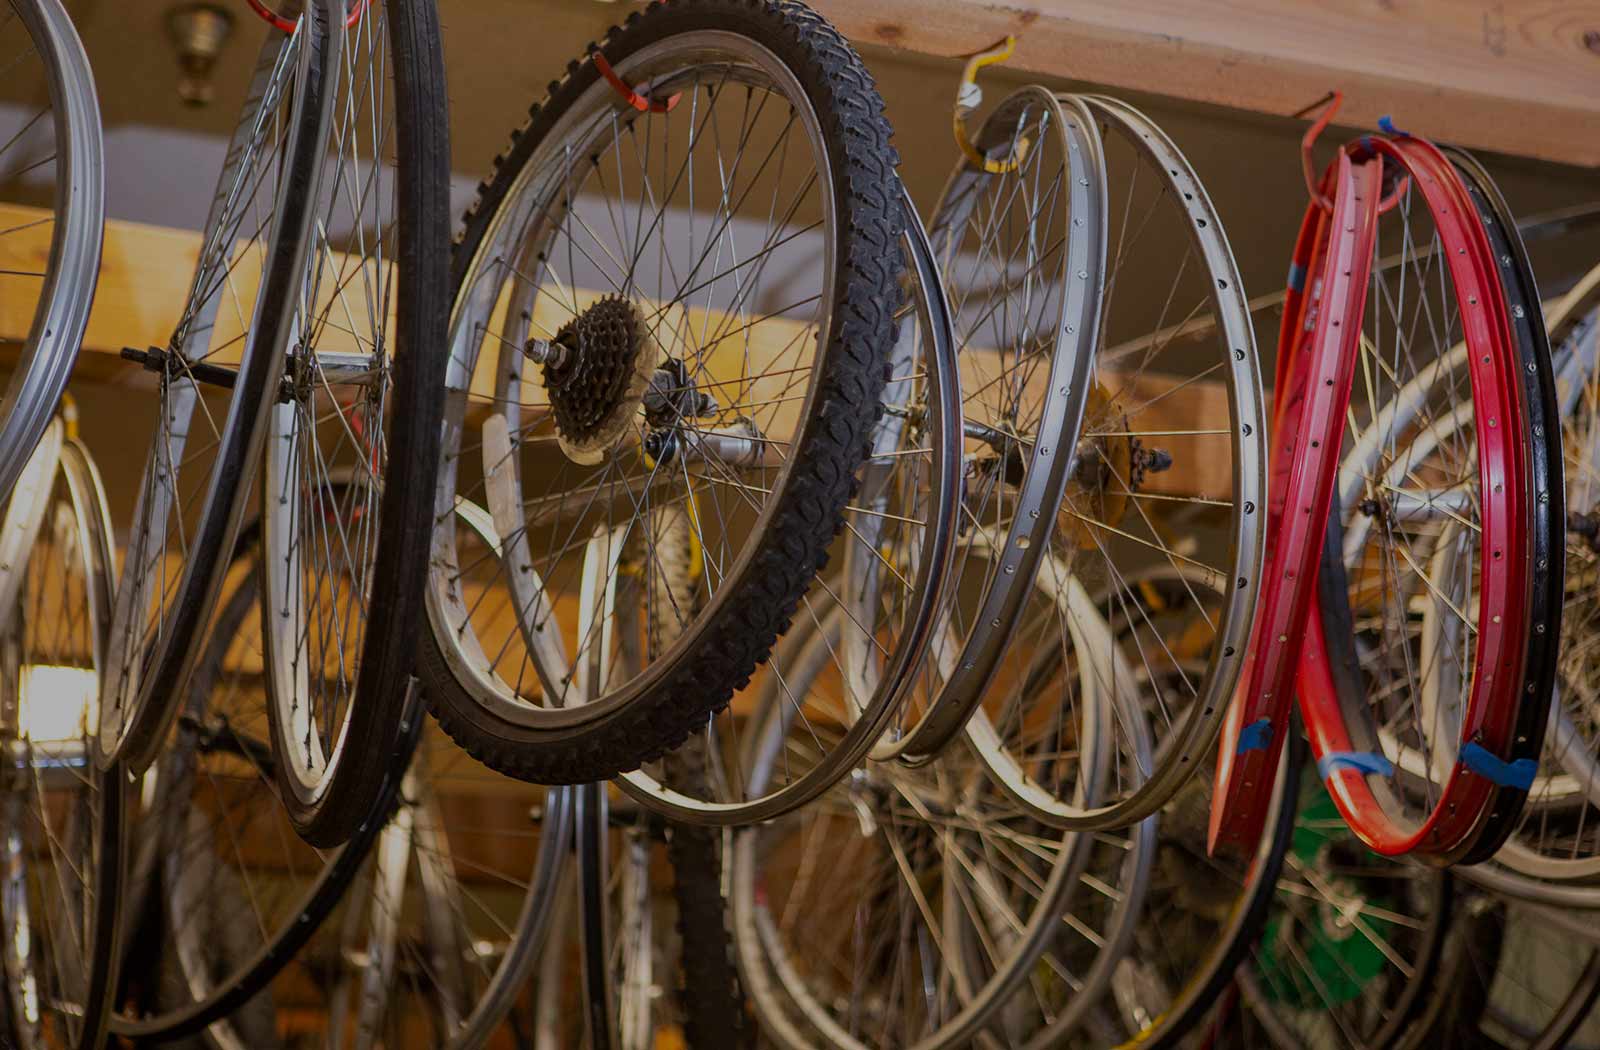 Bike wheels hangin from wooden rafter in the Toy Project Bike Shop